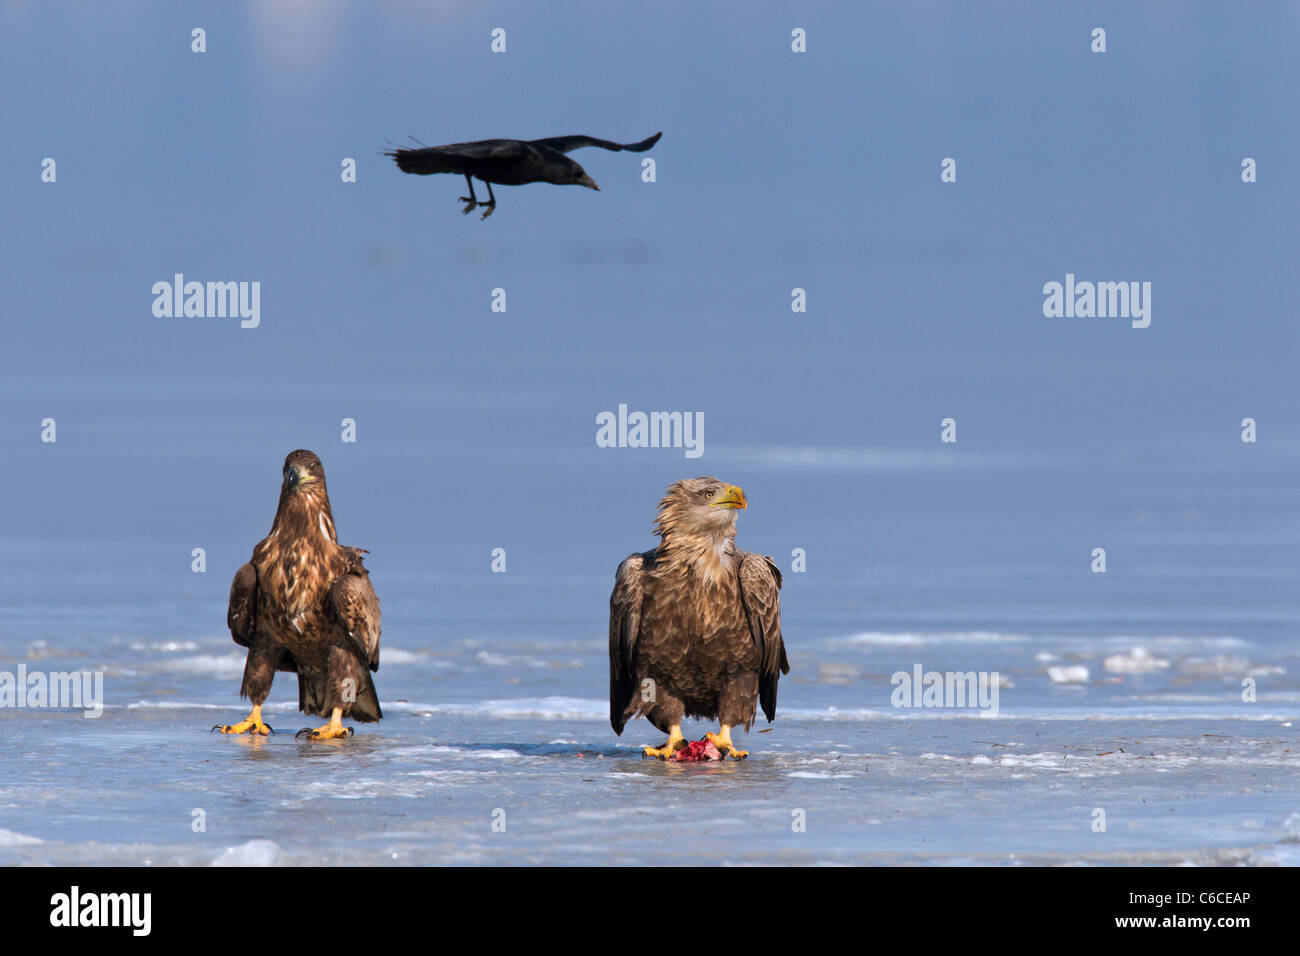 Carrion Crow (Corvus corone) flying over White-tailed sea eagle (Haliaeetus albicilla) eating fish on frozen lake in winter Stock Photo